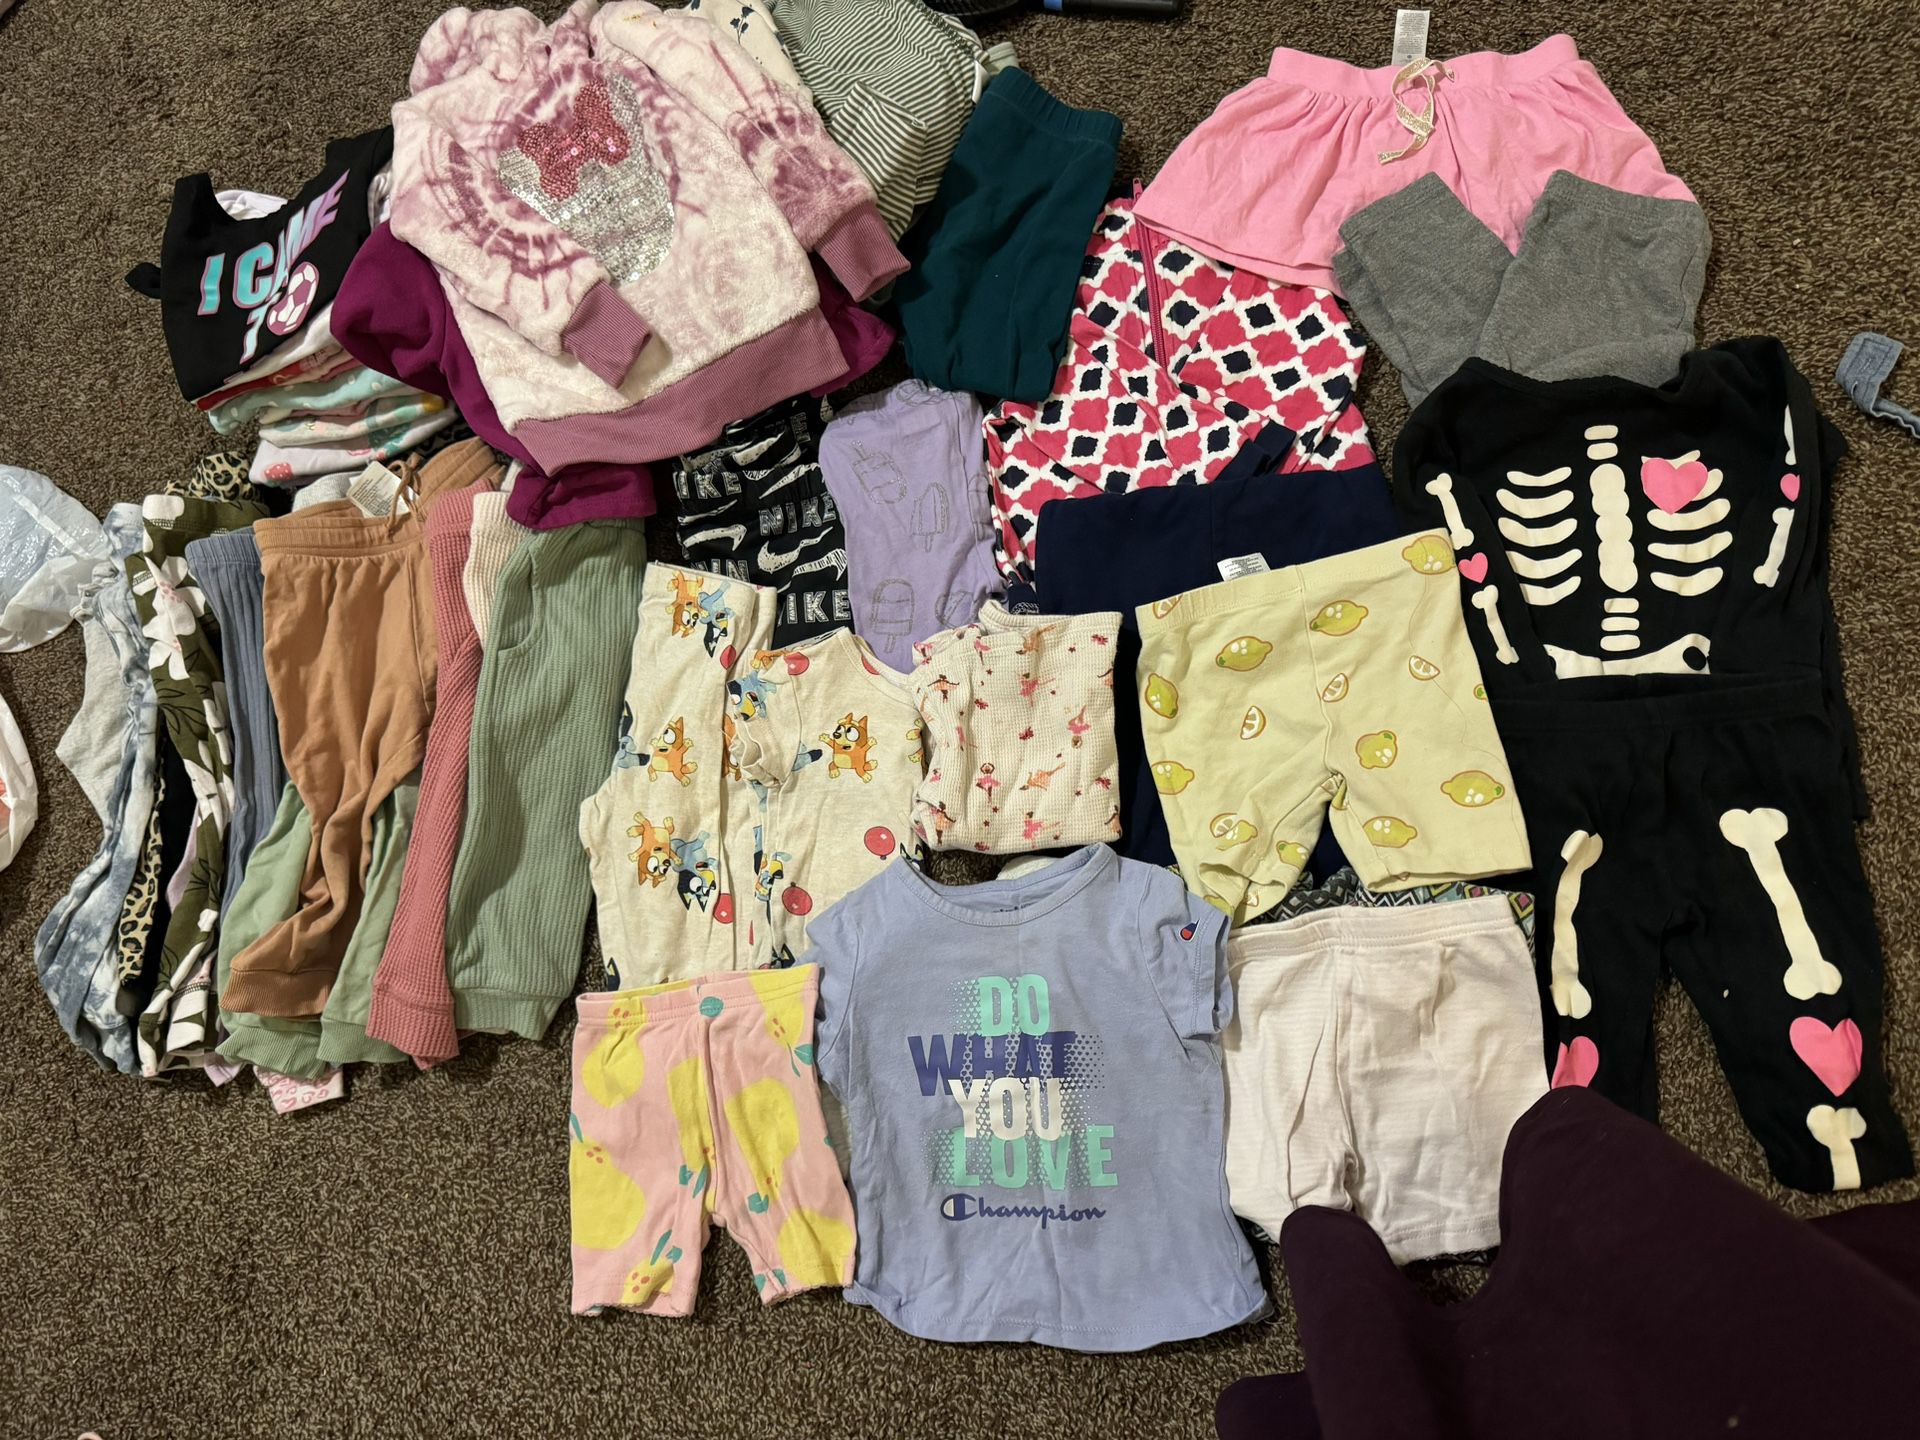  Baby Girl Clothing 12.18.24 Months 